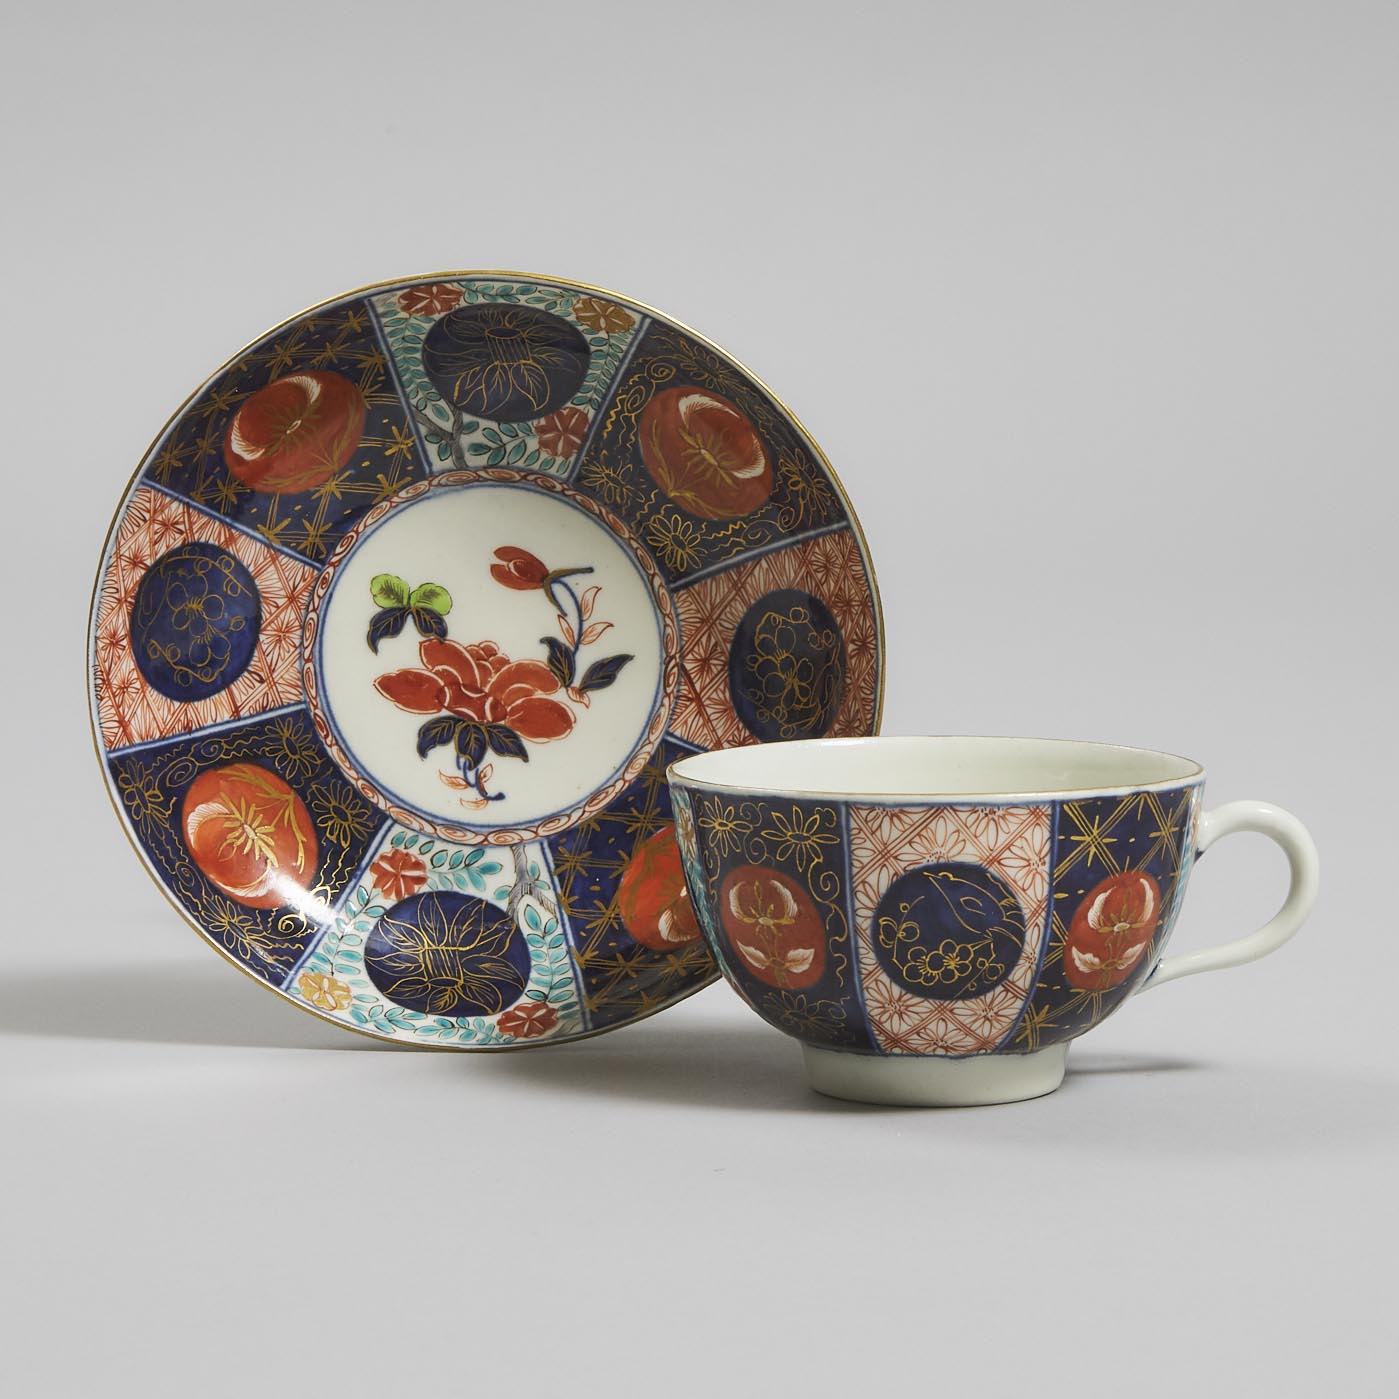 Worcester 'Old Mosaic' Japan Pattern Cup and Saucer, c.1770